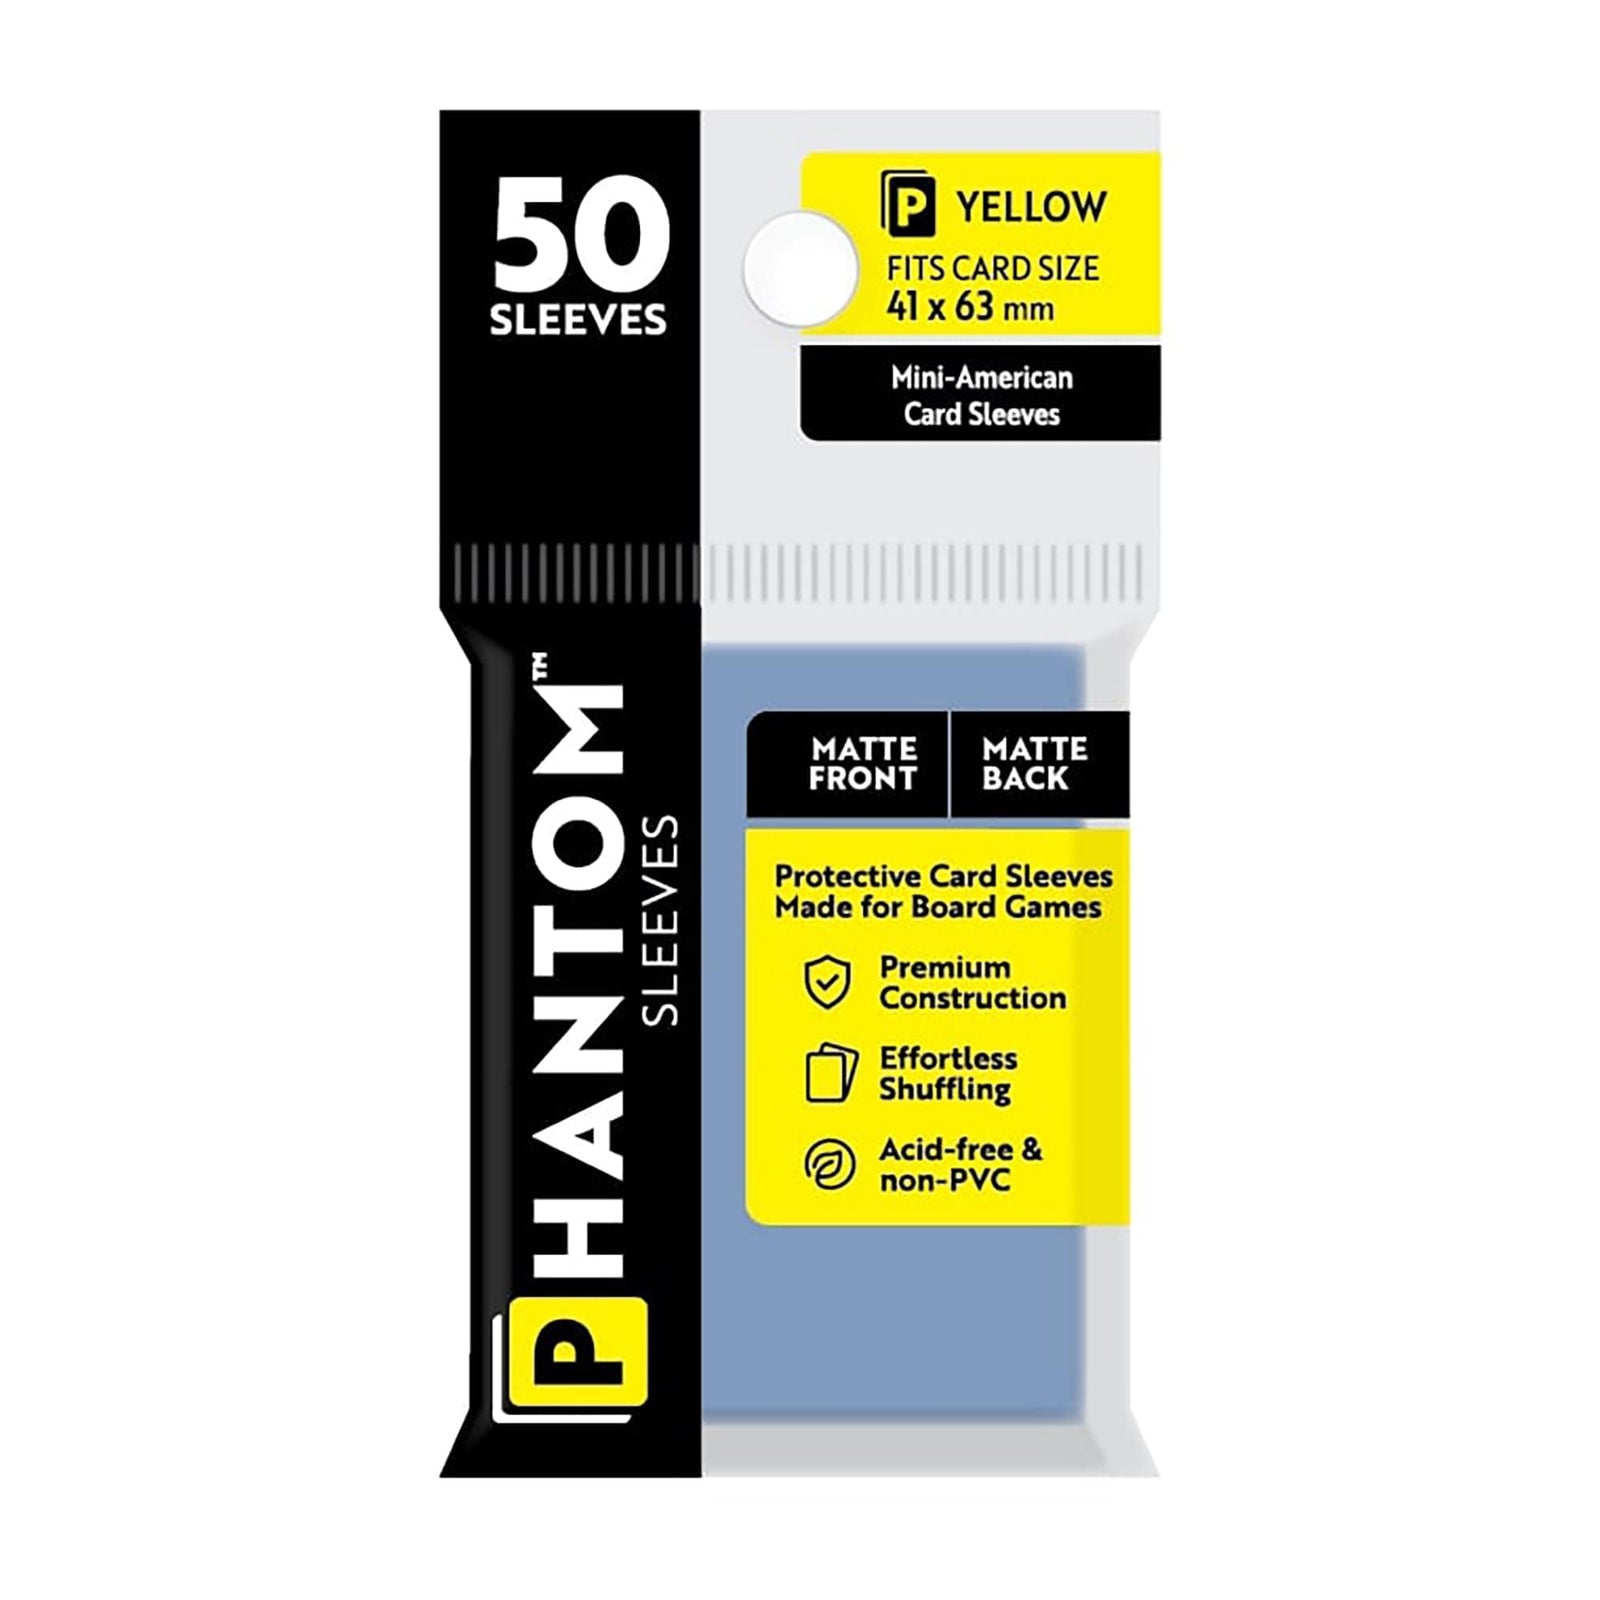 """Phantom Sleeves: """"Yellow Size"""" (41mm x 63mm) - Matte/Matte (50)""" - Lost City Toys